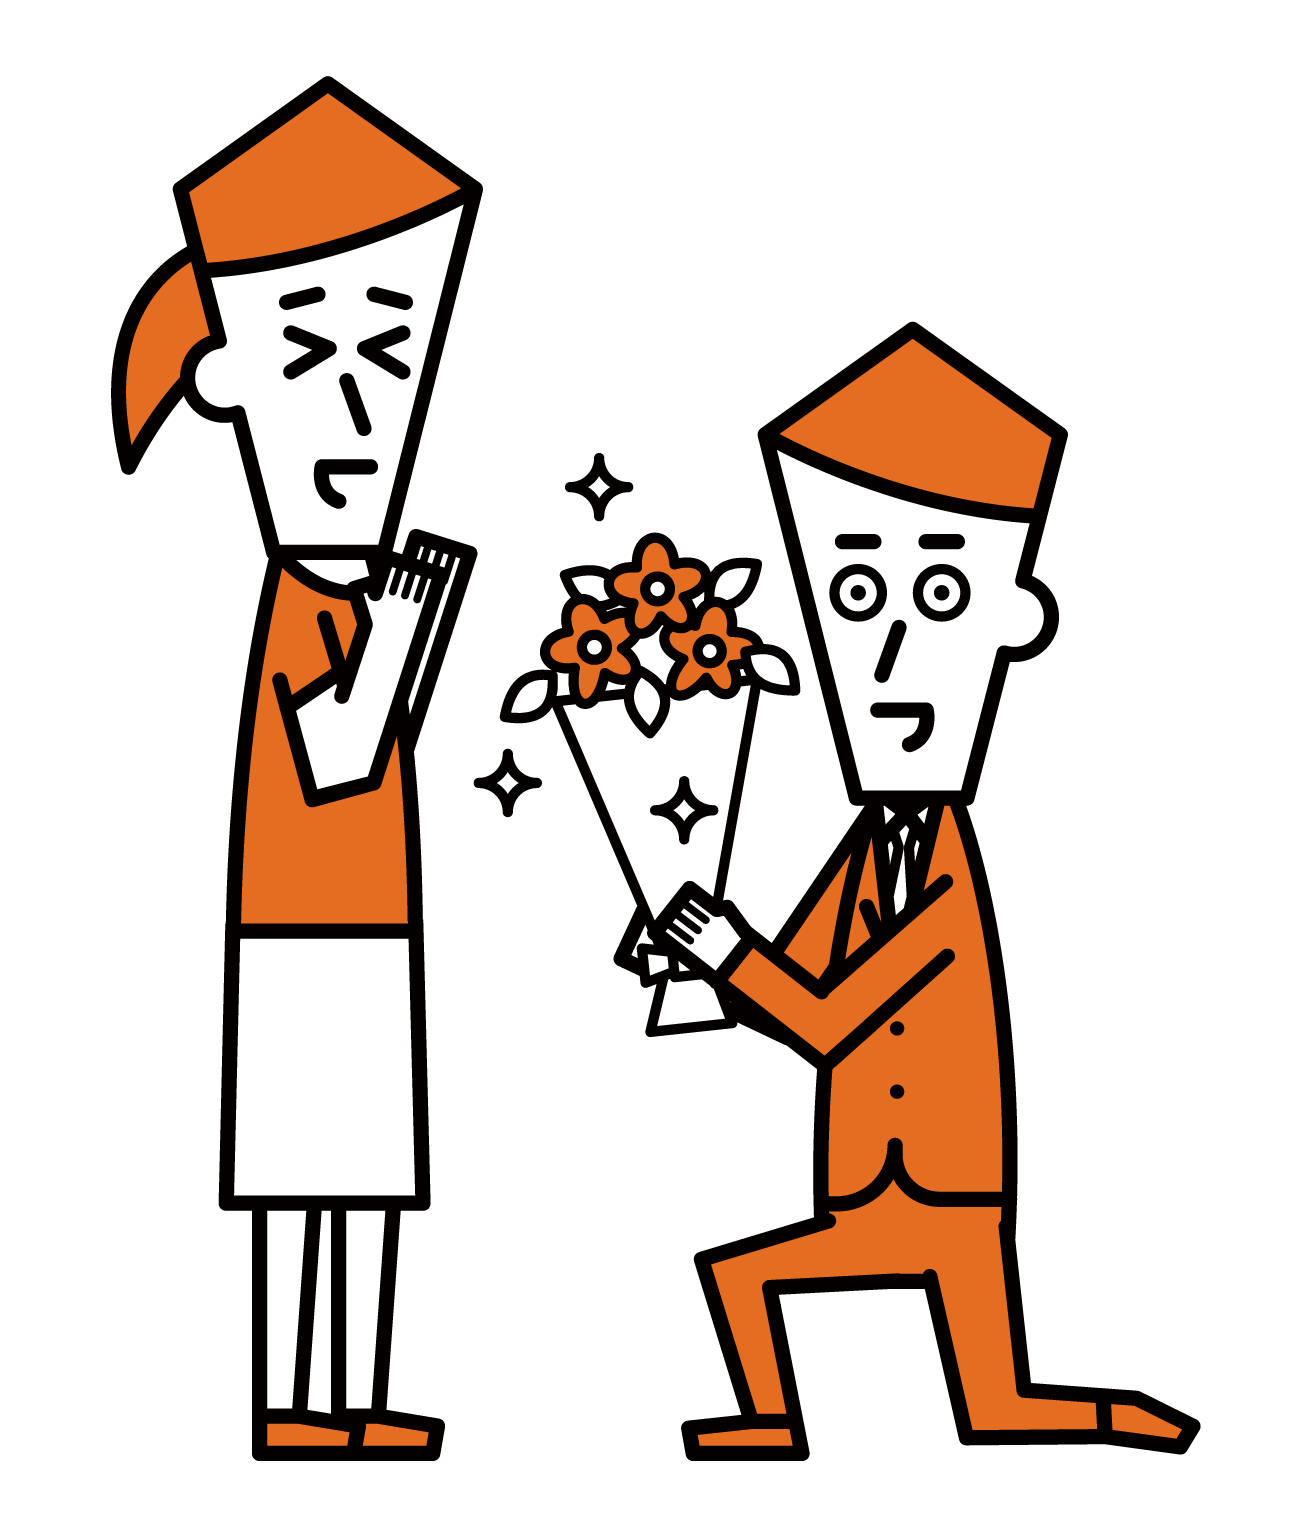 Illustration of a man proposing by handing over a bouquet of flowers